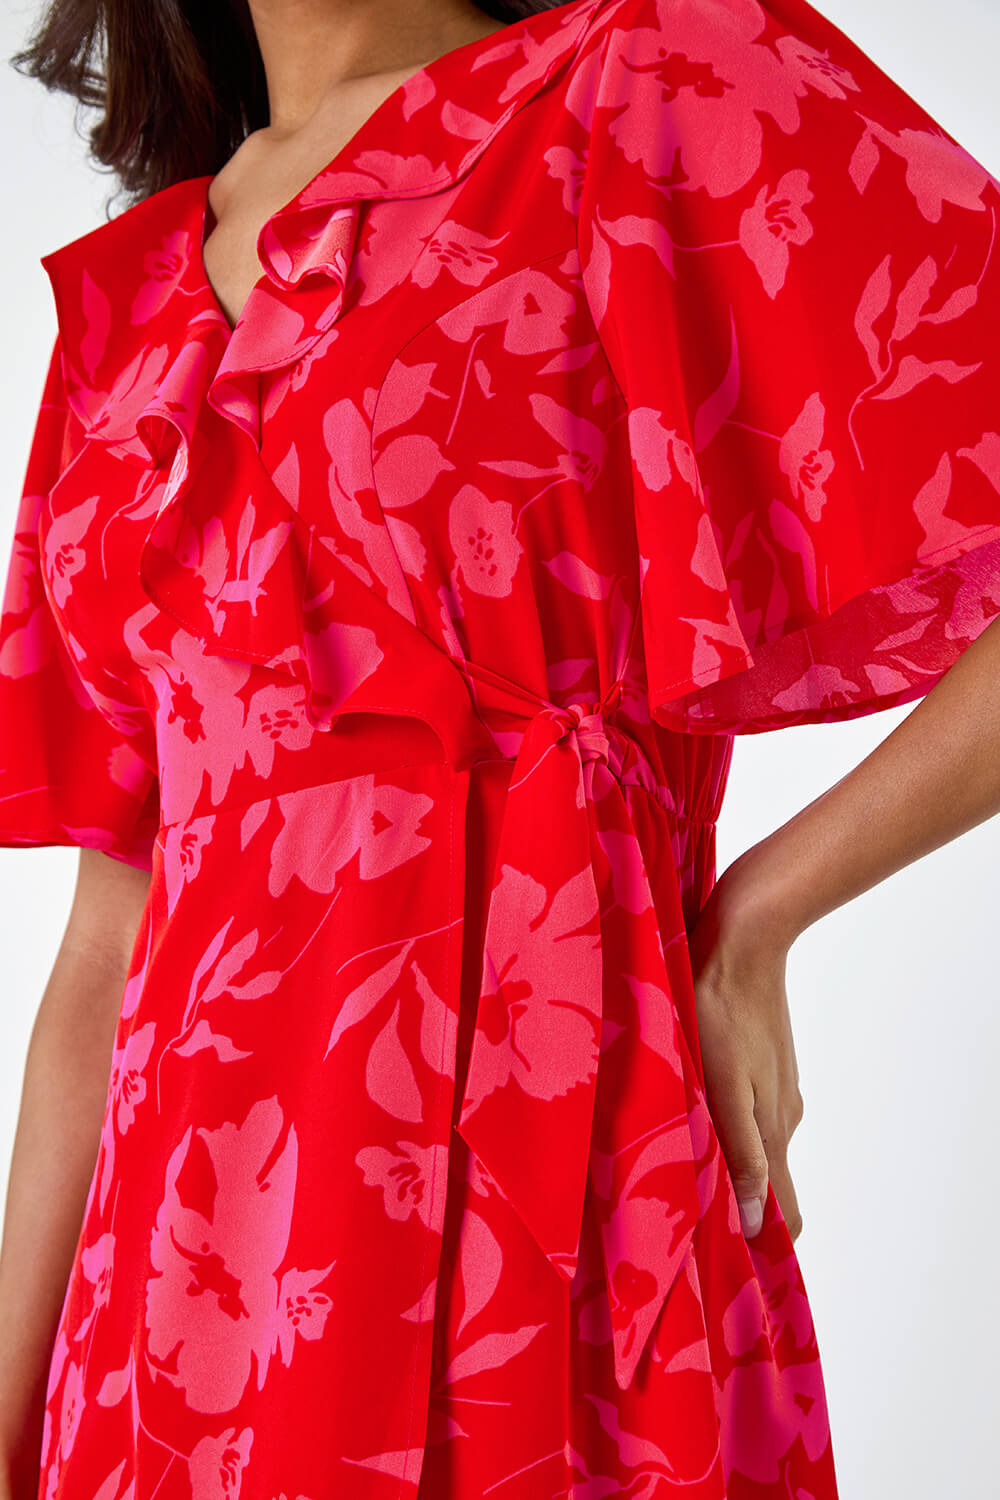 Red Floral Print Wrap Midi Dress, Image 5 of 5